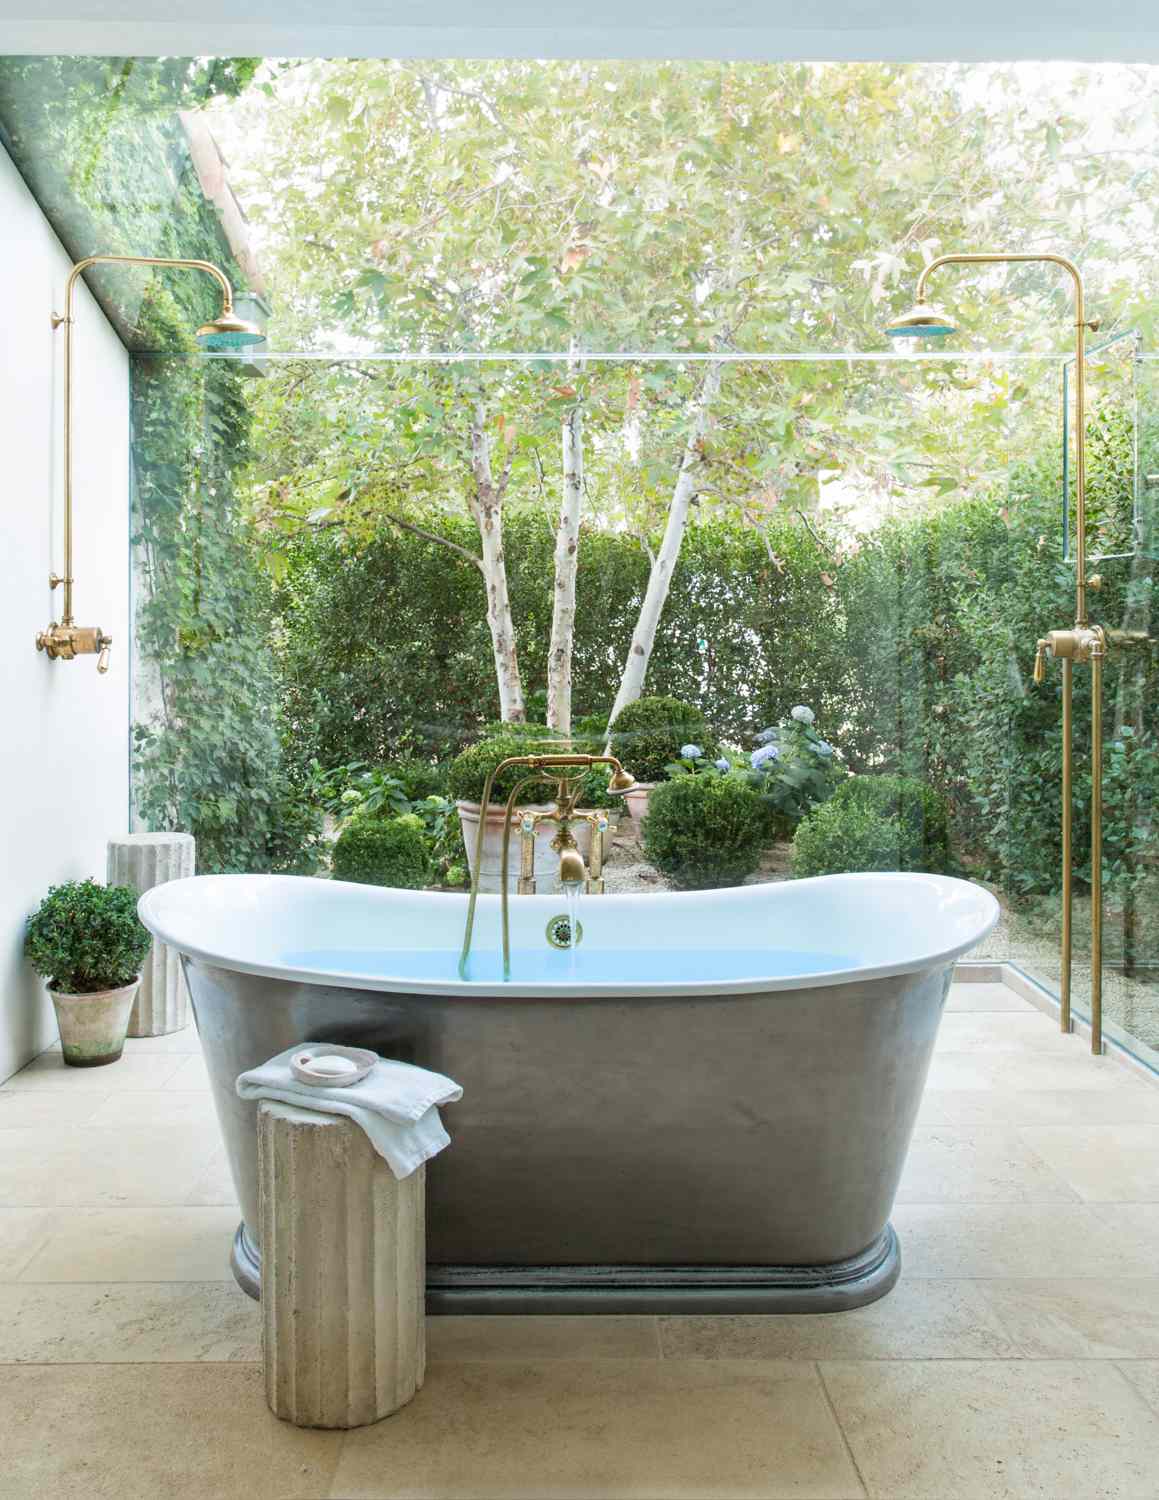 What are garden tubs ?